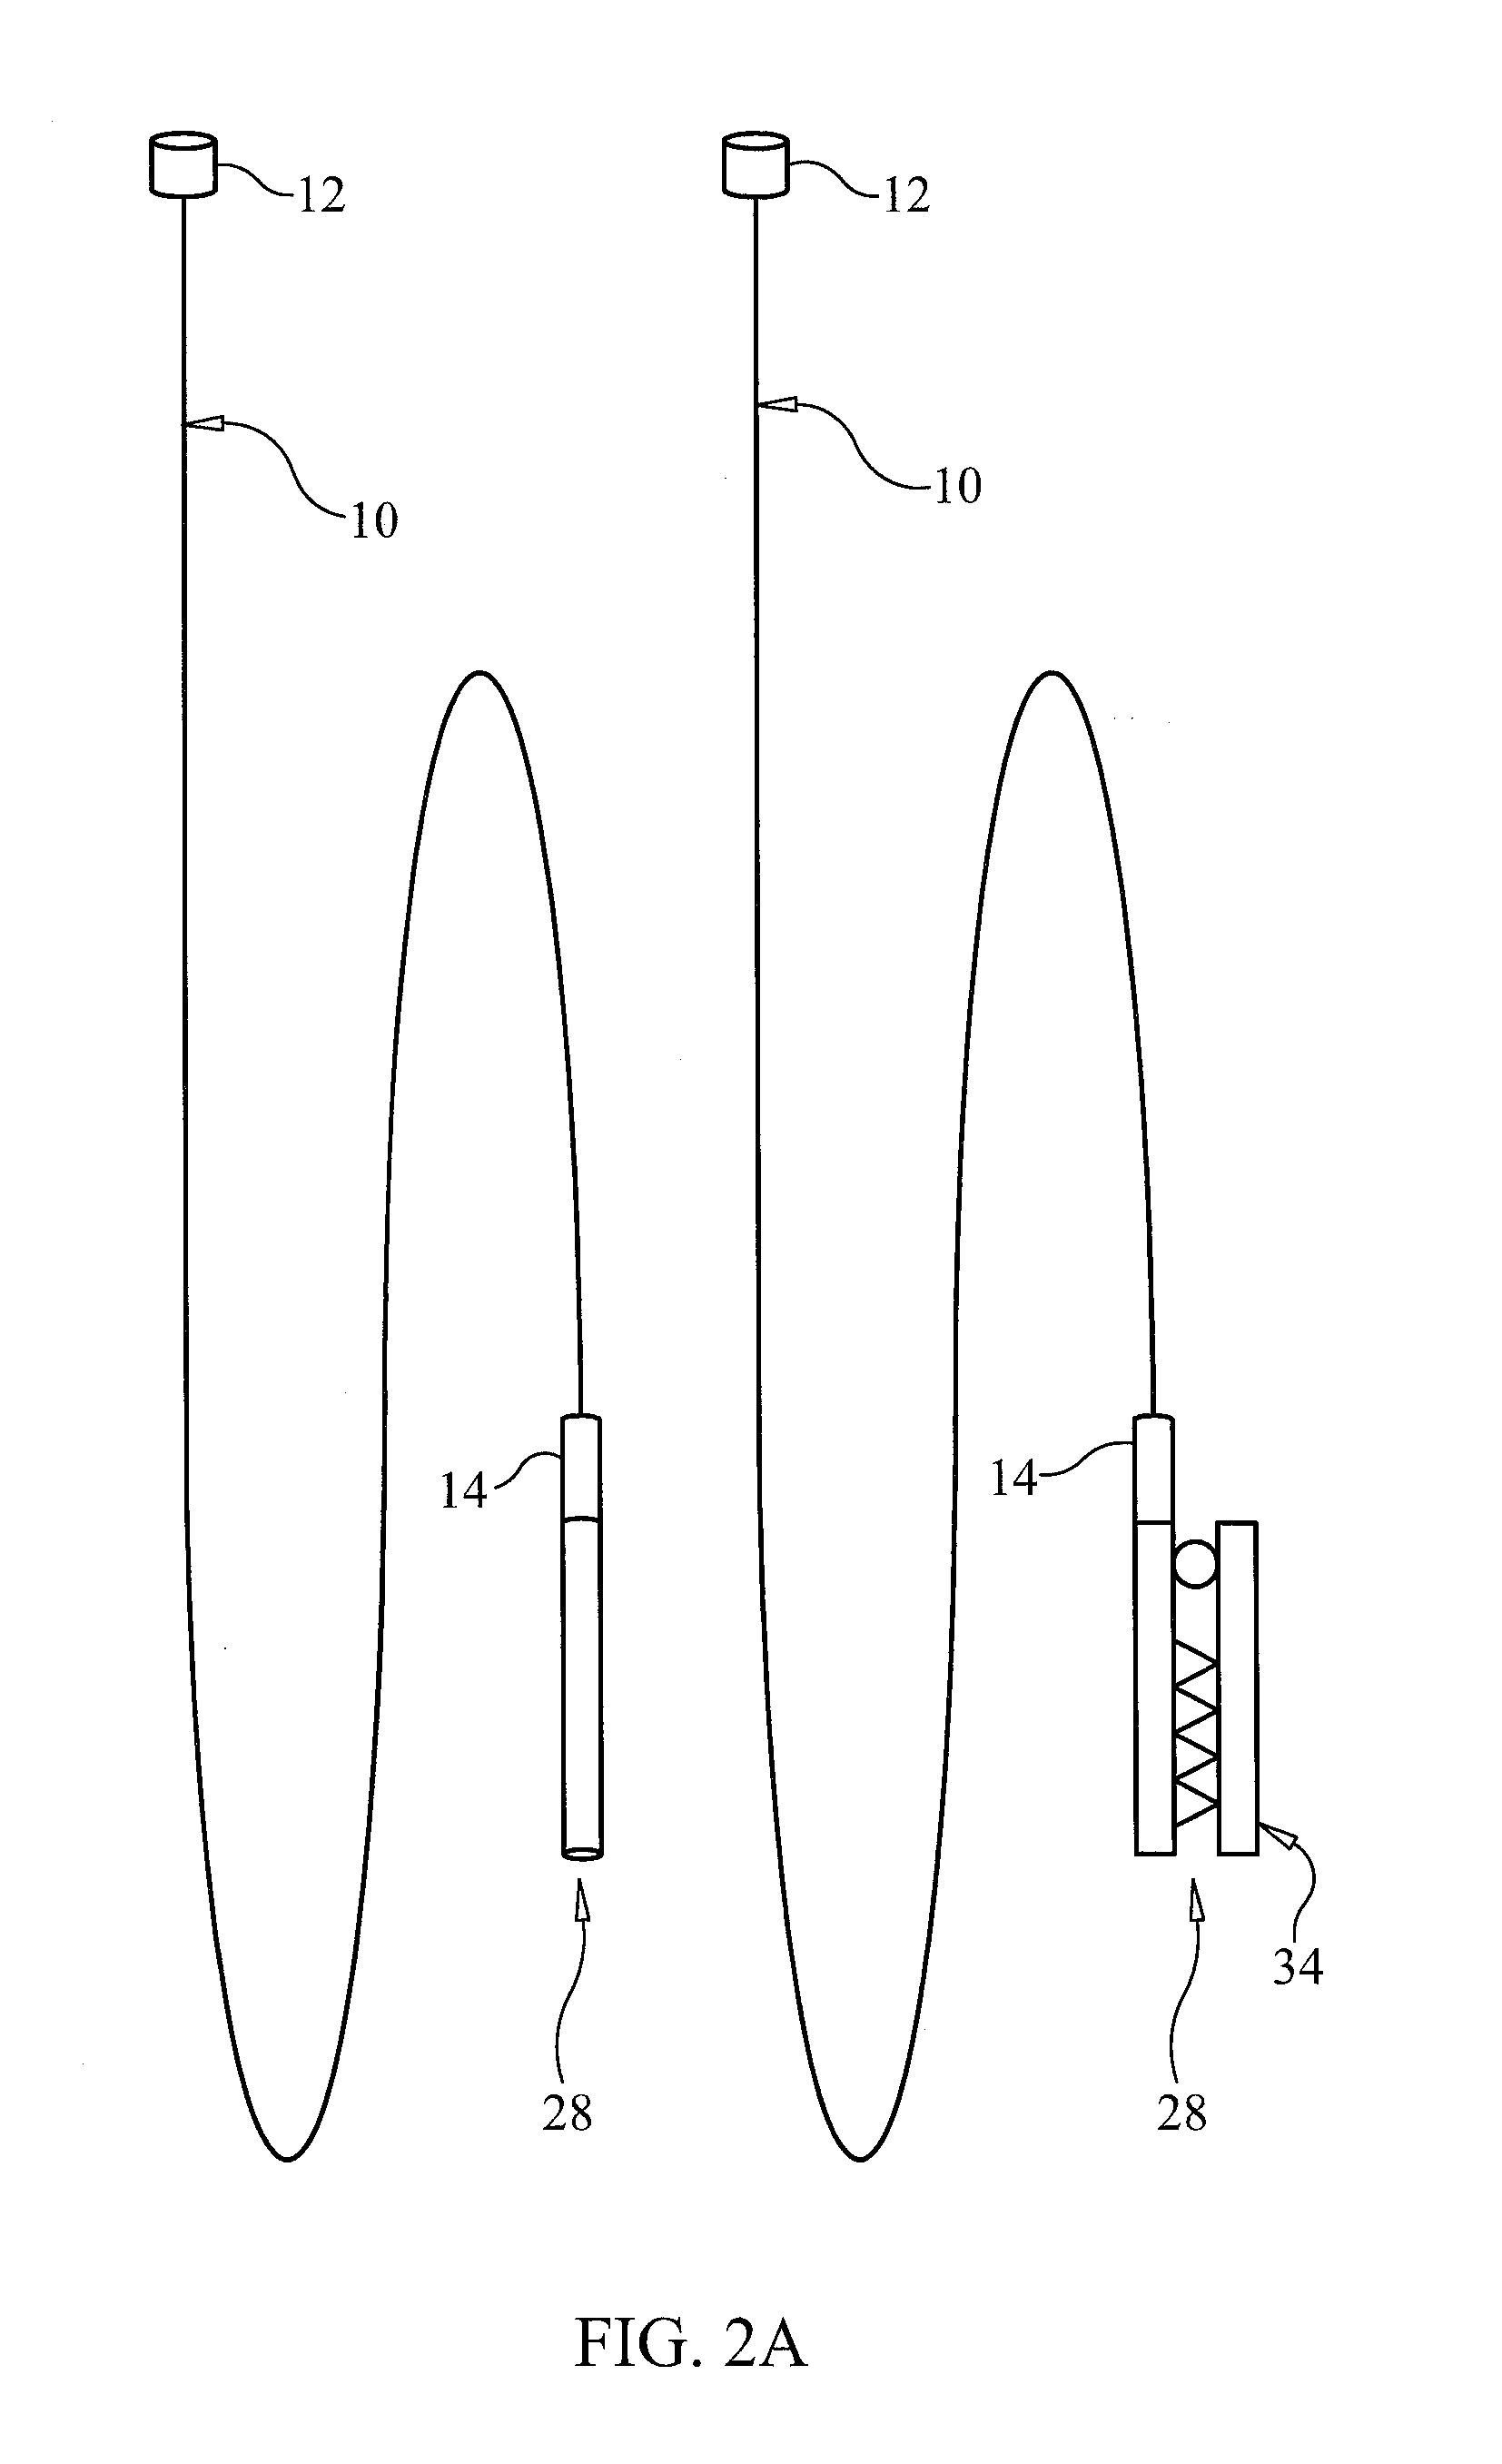 Method and device for non-invasively determining the use of non-electrically conductive plumbing in a residence